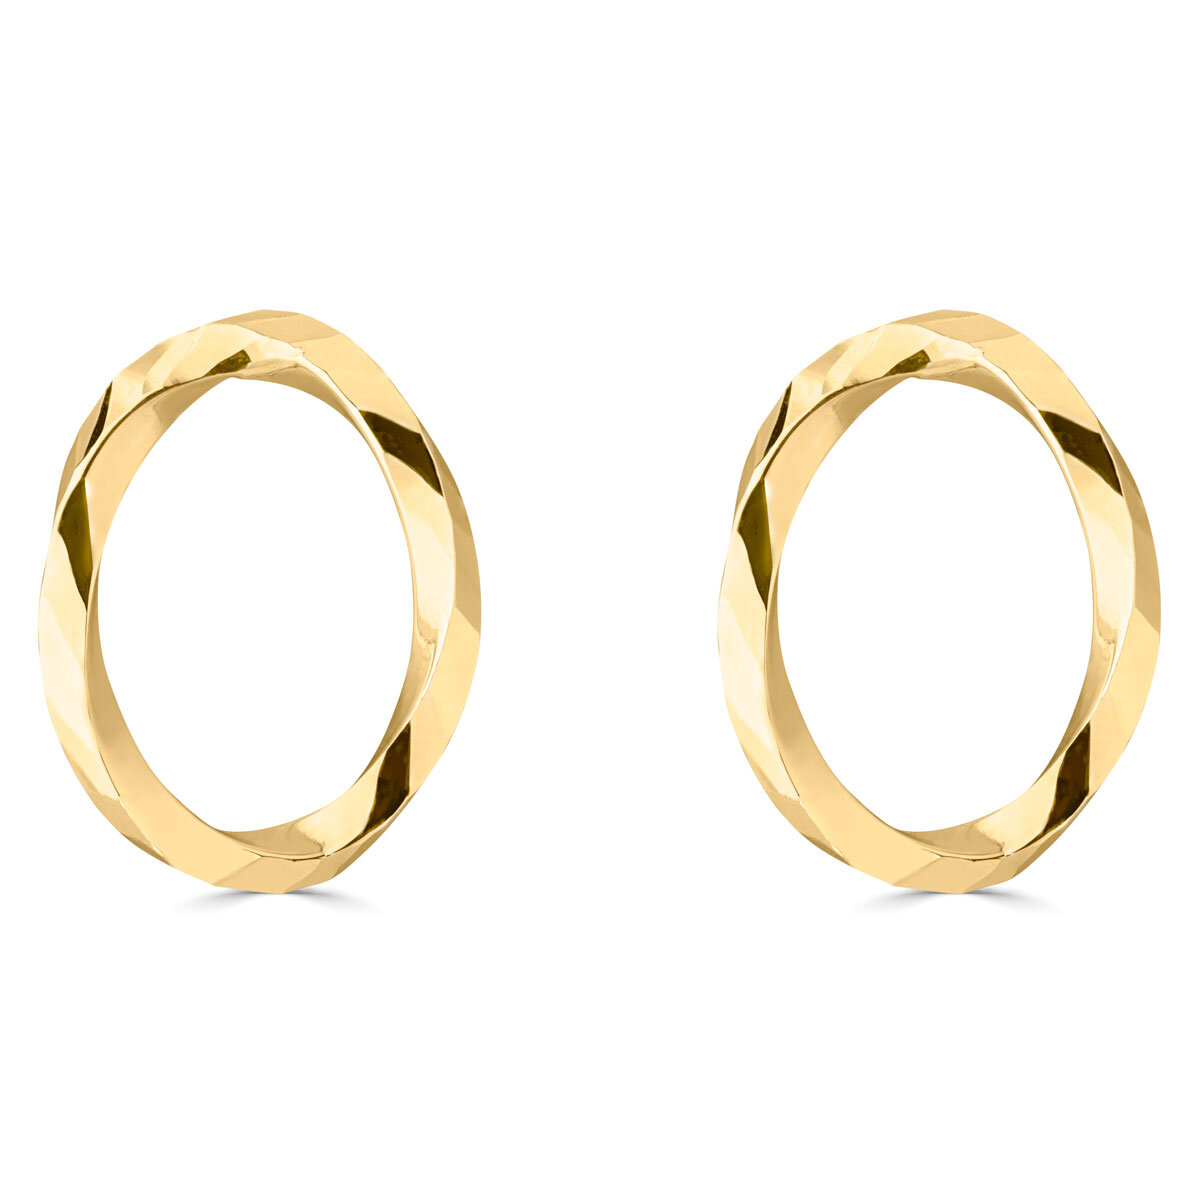 14ct Yellow Gold Twisted Oval Stud Earrings